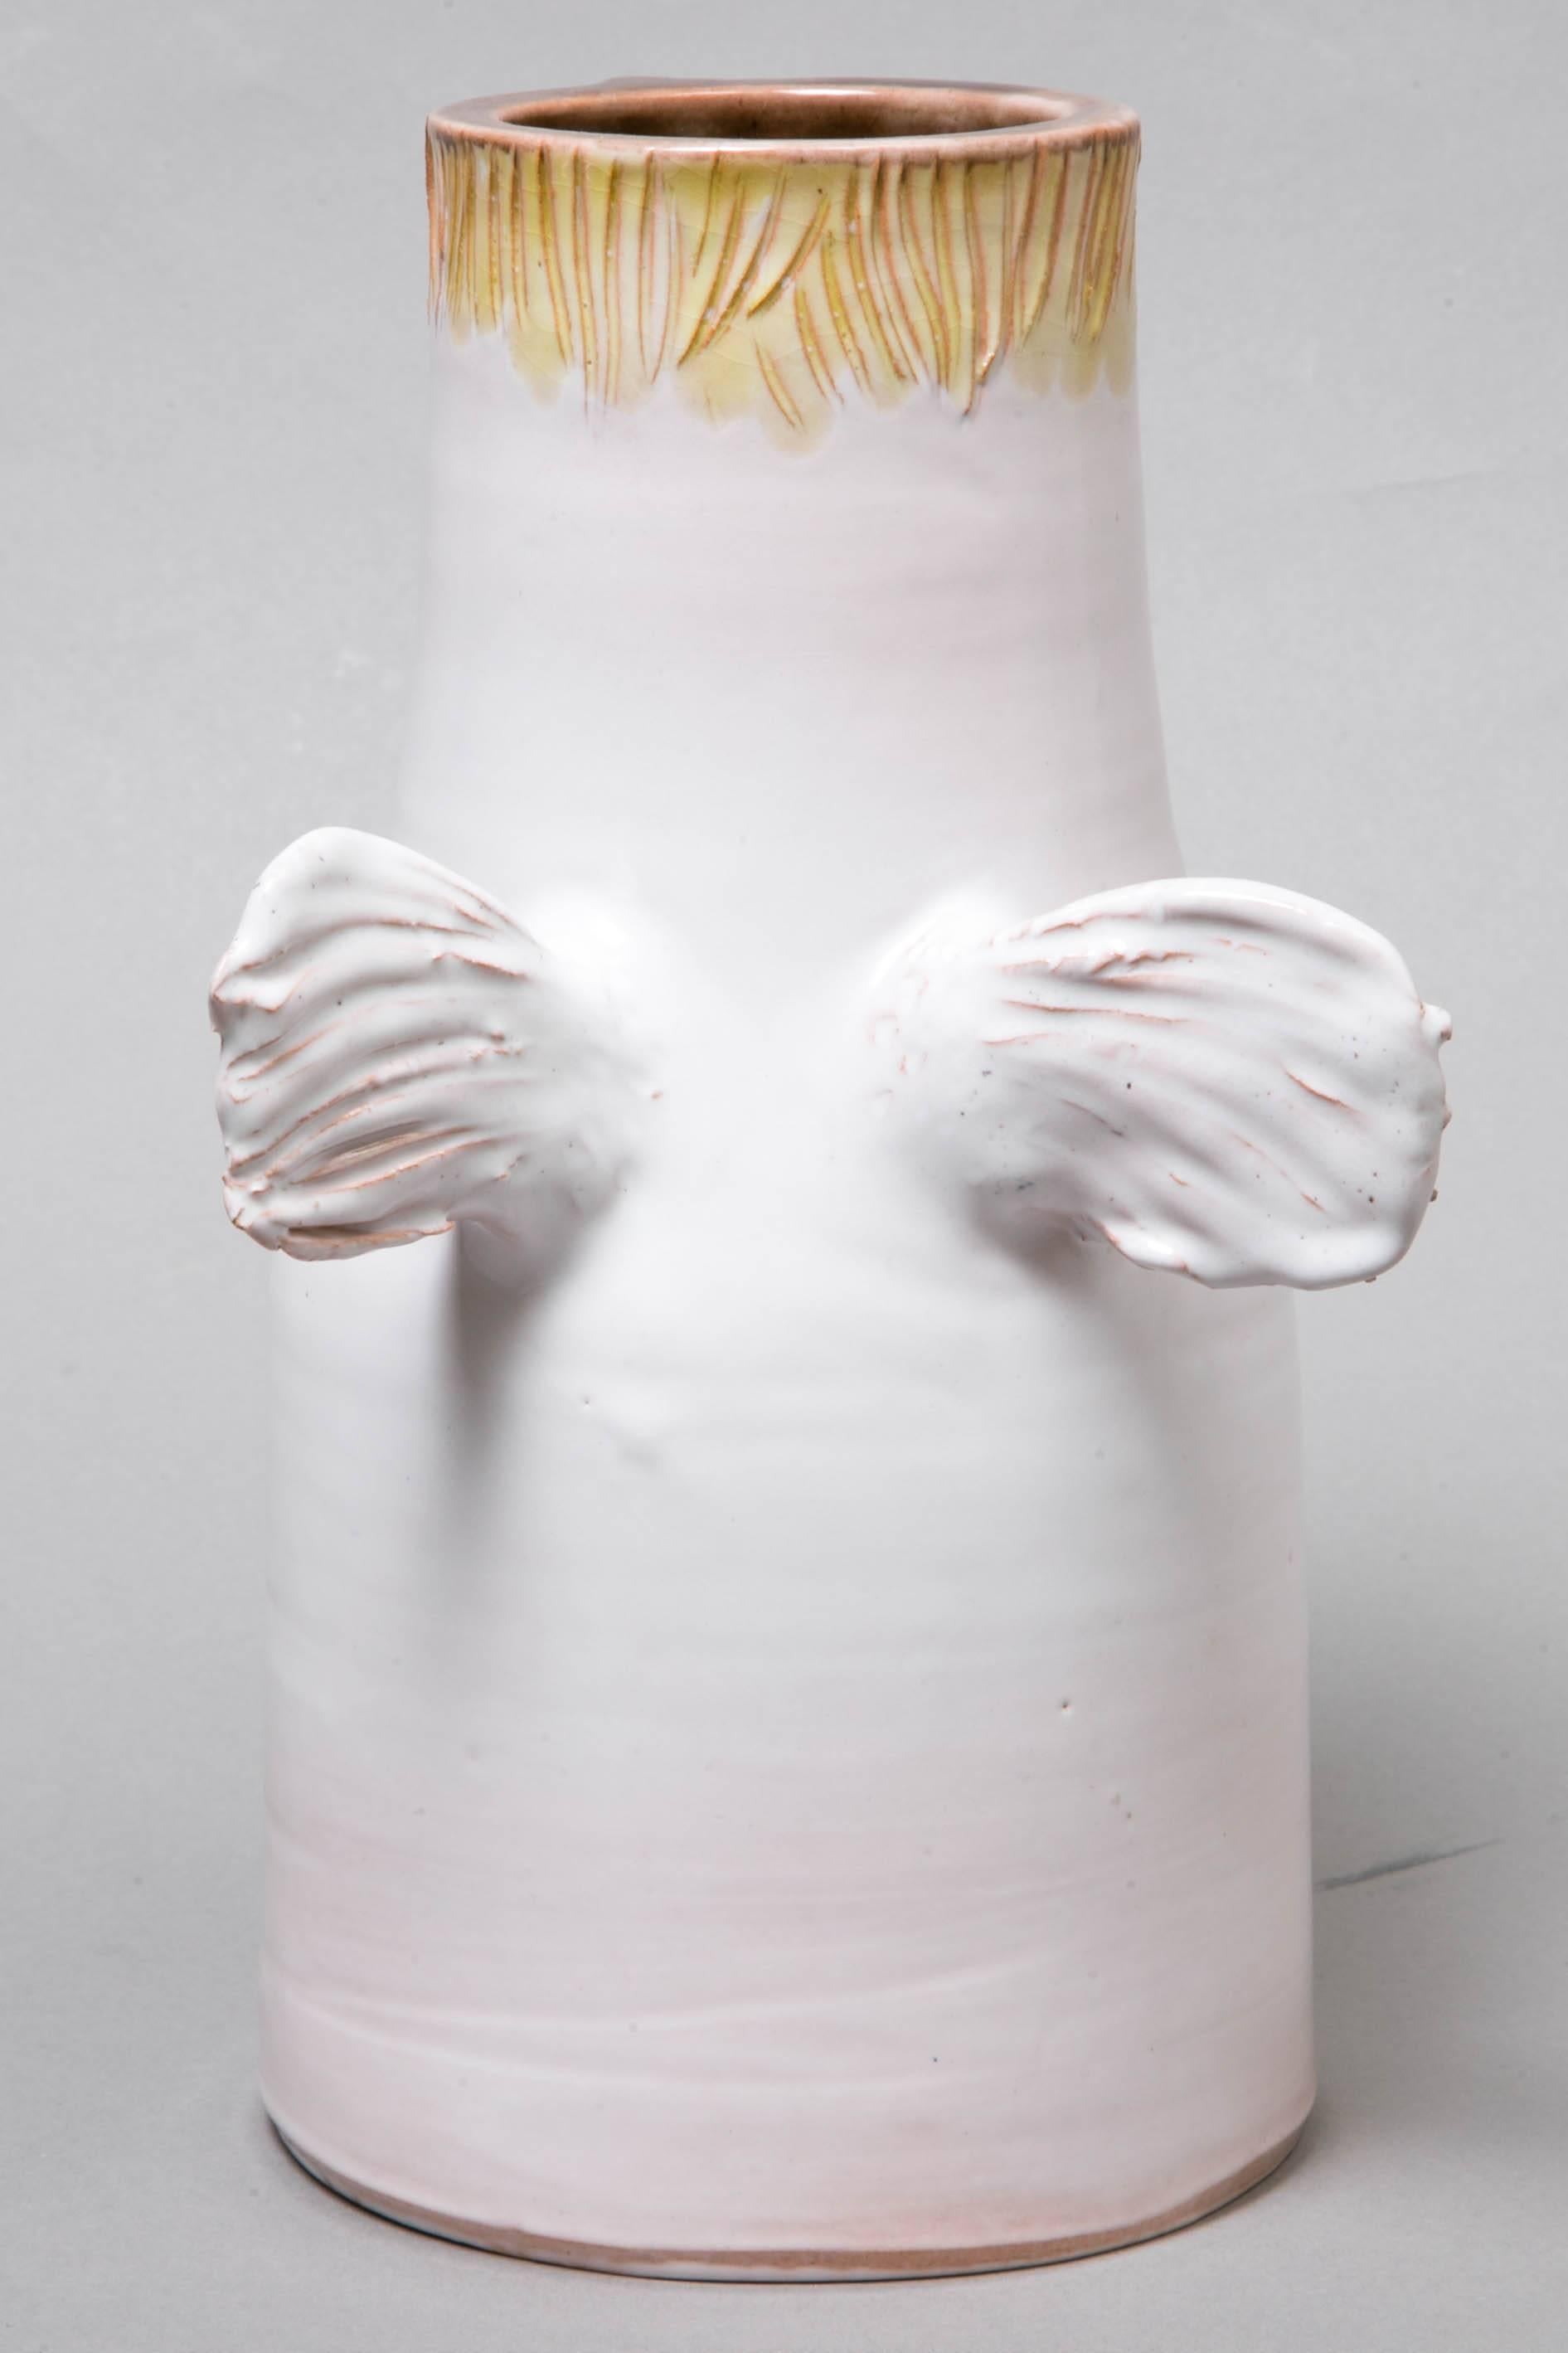 Enameled White Winged Vase with a Face, circa 1965, by the Cloutier Brothers For Sale